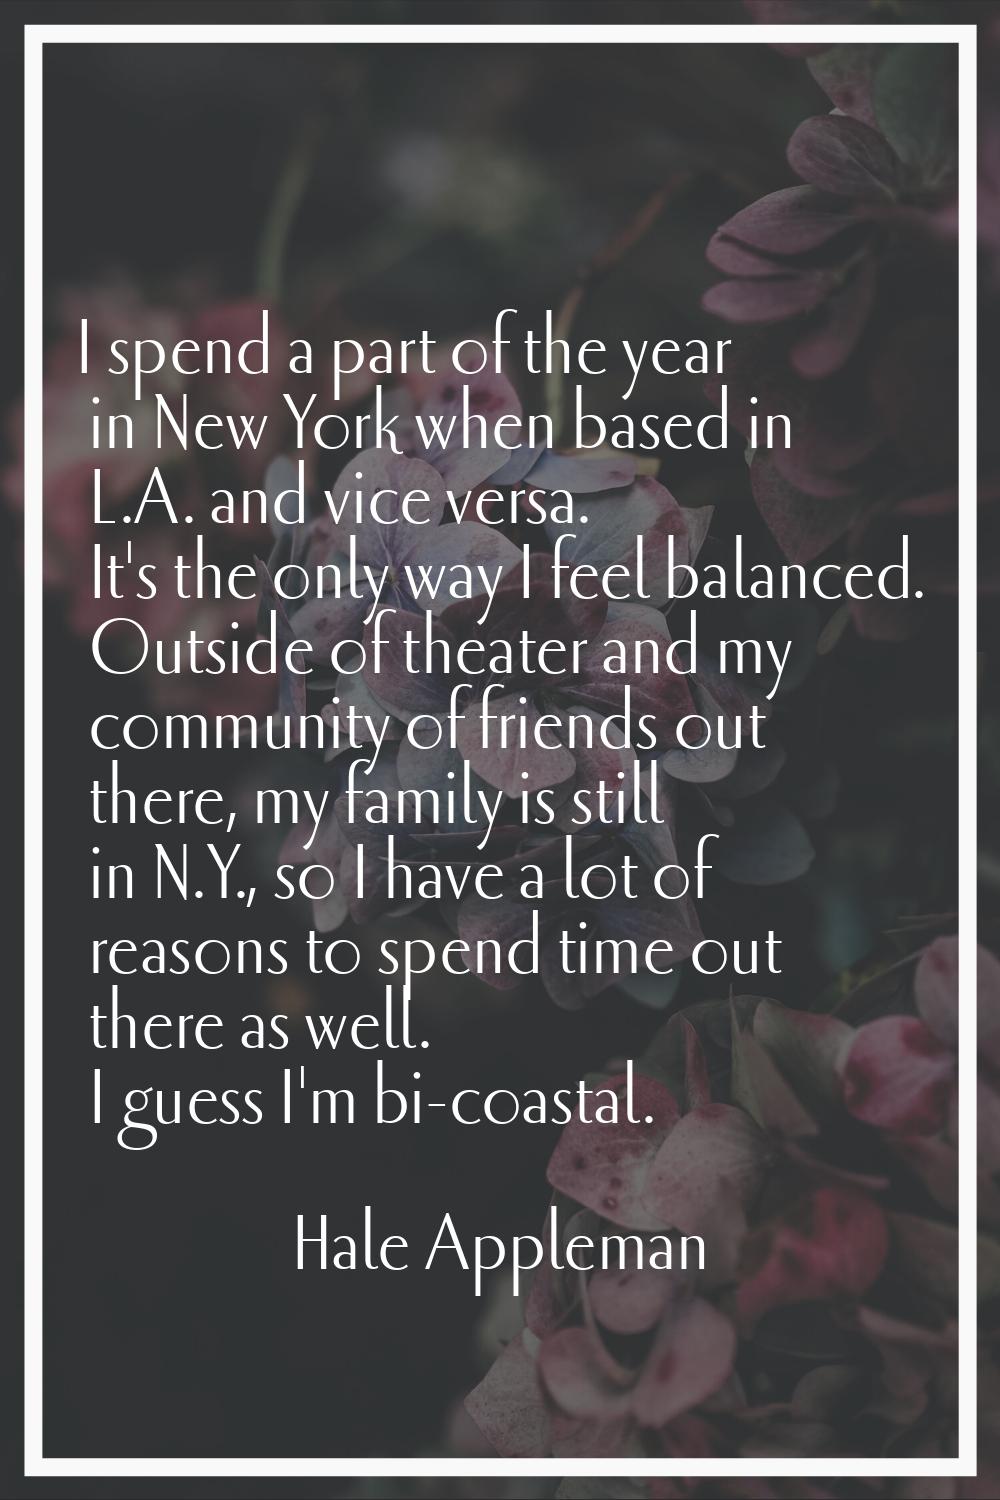 I spend a part of the year in New York when based in L.A. and vice versa. It's the only way I feel 